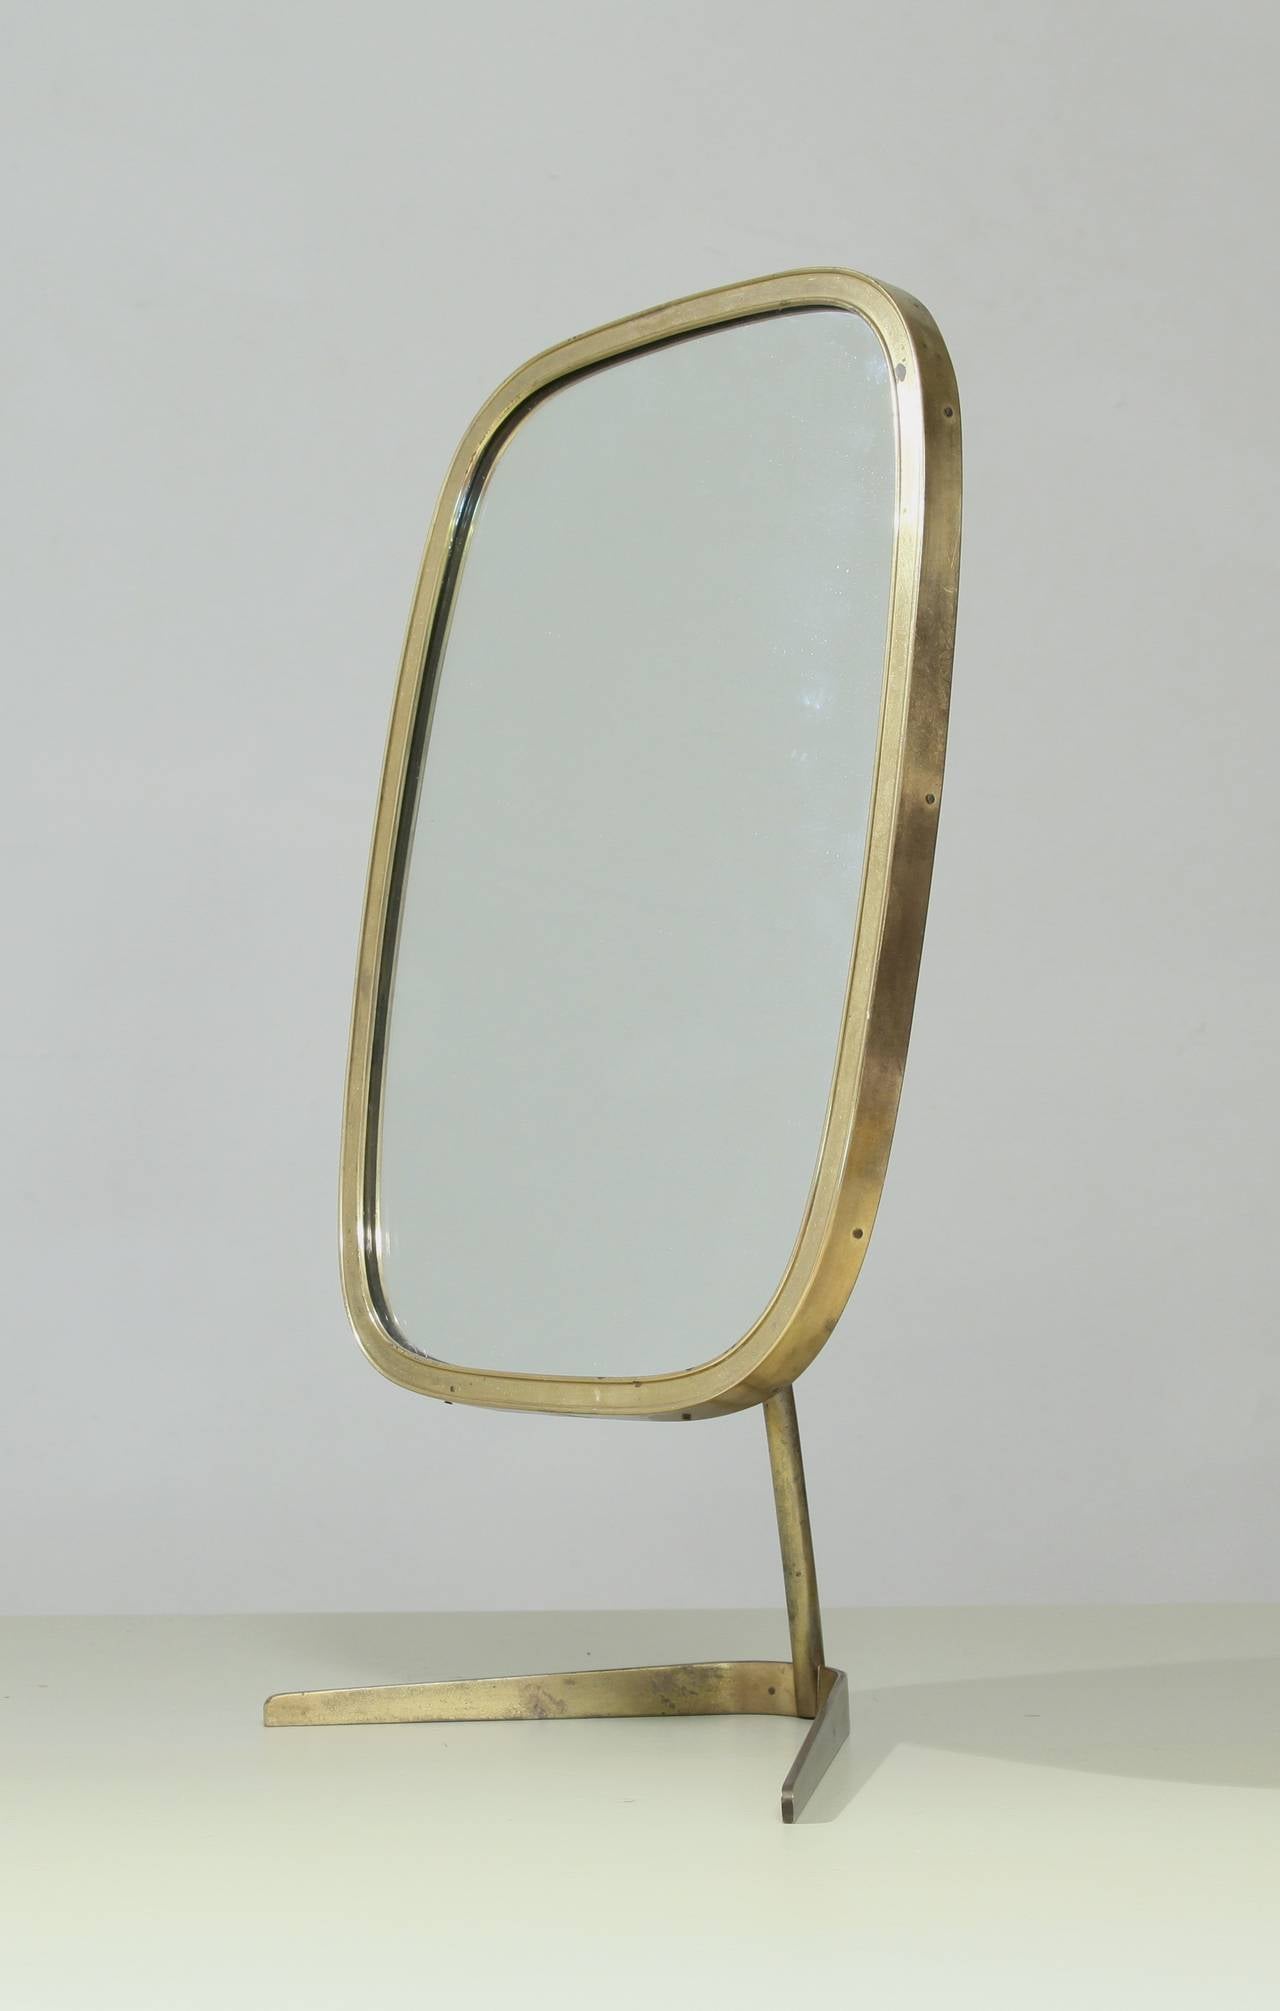 A beautiful Italian vanity mirror with a rounded, rectangular frame and standing on a crow's foot. Simple and beautiful.
.